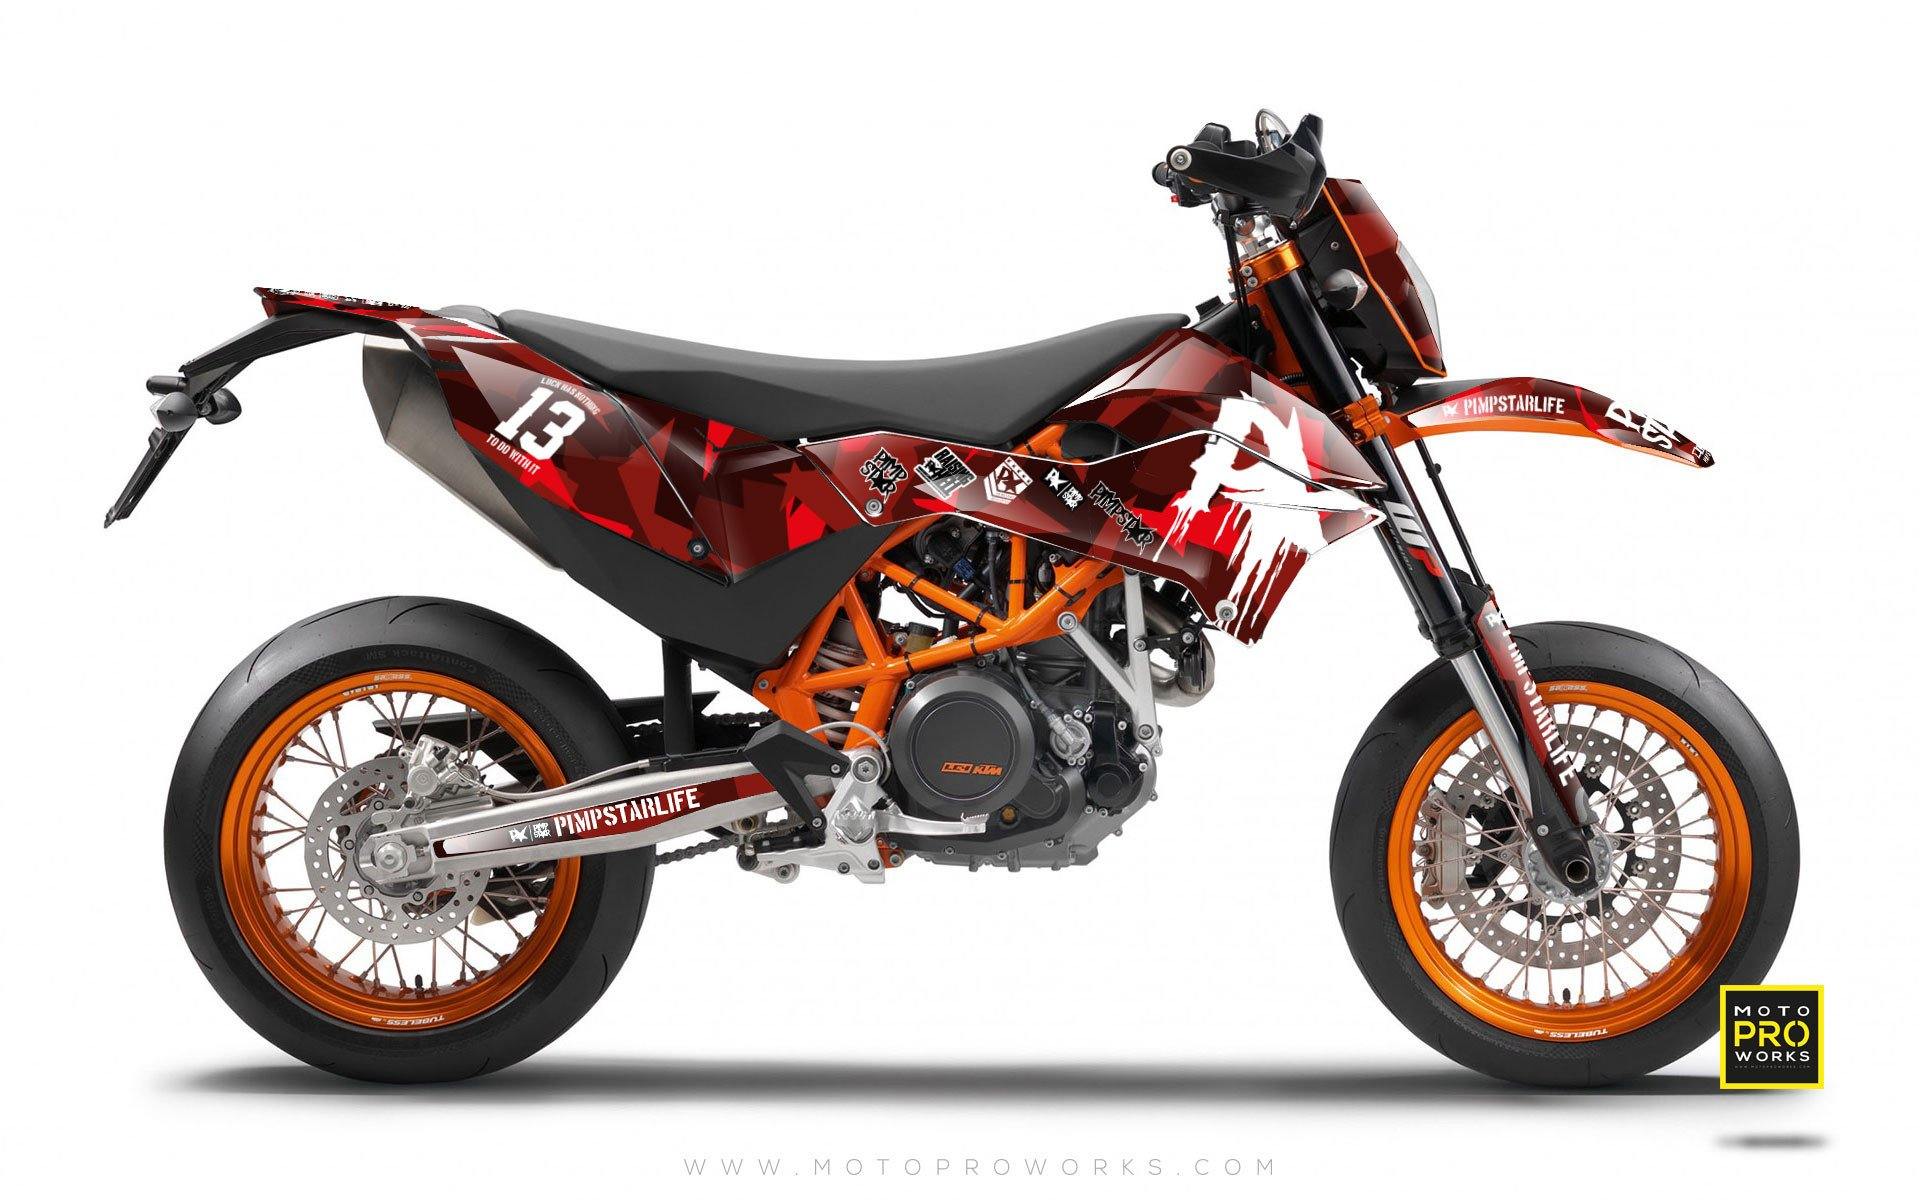 KTM GRAPHIC KIT - "M90" (ruby) - MotoProWorks | Decals and Bike Graphic kit